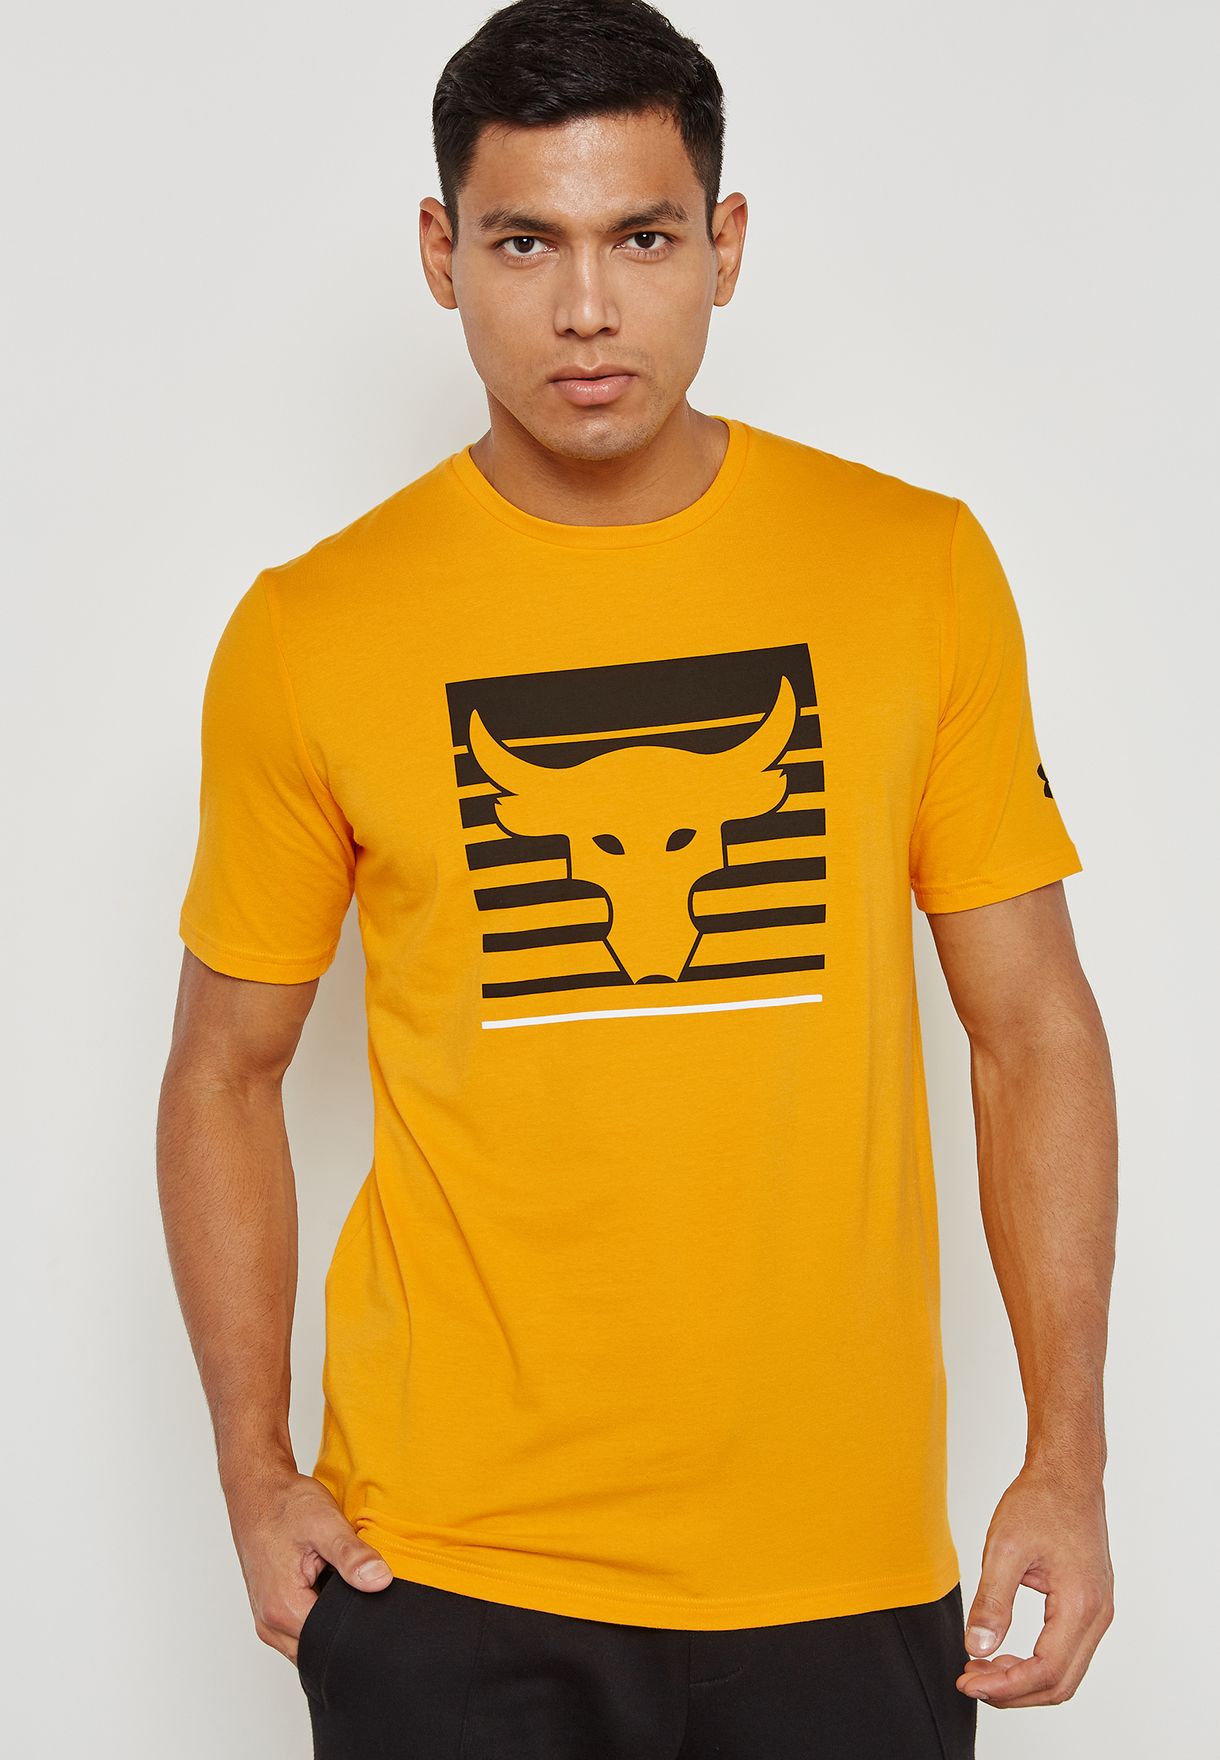 under armour yellow t shirt online